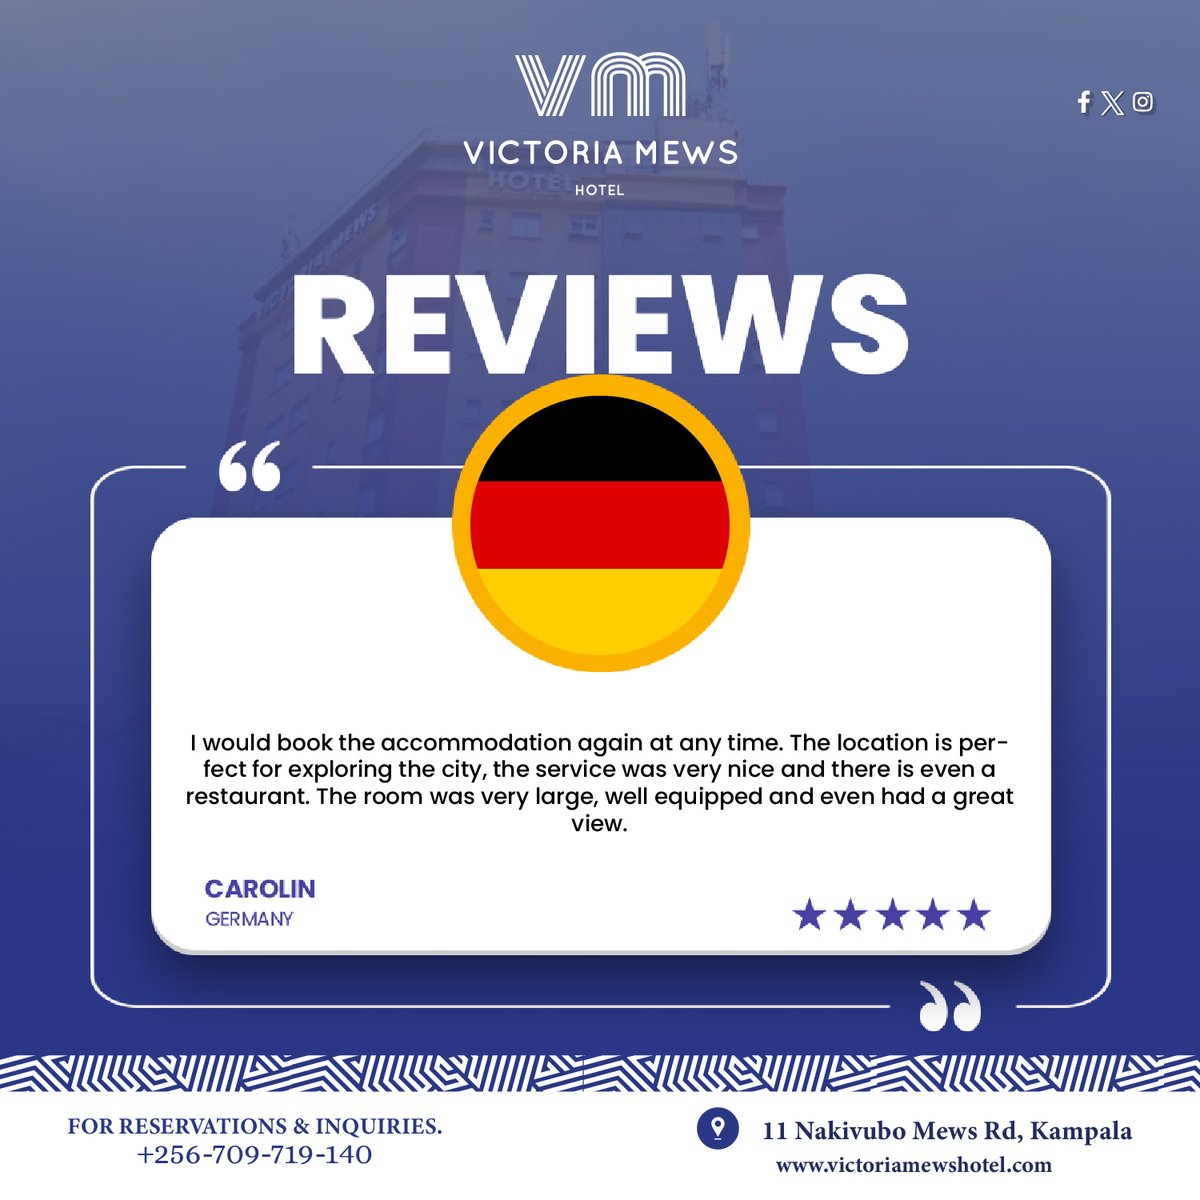 ⭐️ A glowing review! ⭐️ We're honored to be your top choice with our prime location, impeccable service, and breathtaking views. Ready to welcome you back anytime at Victoria Mews Hotel! 

#GuestSatisfaction #PerfectStay #VictoriaMewsExperience